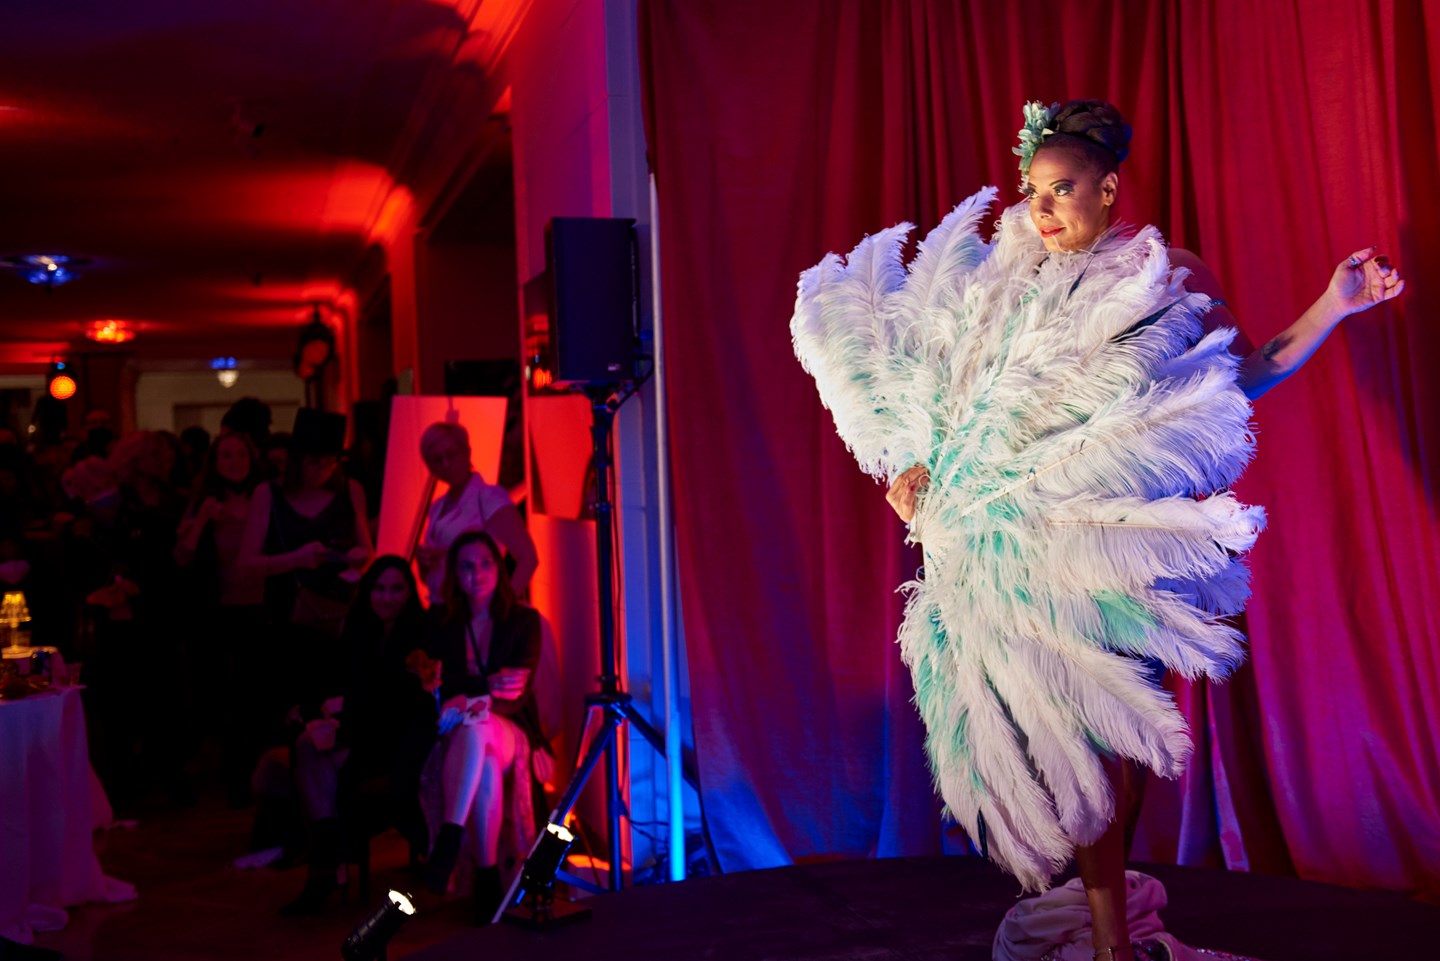 performer on stage with a large feather fan covering their body